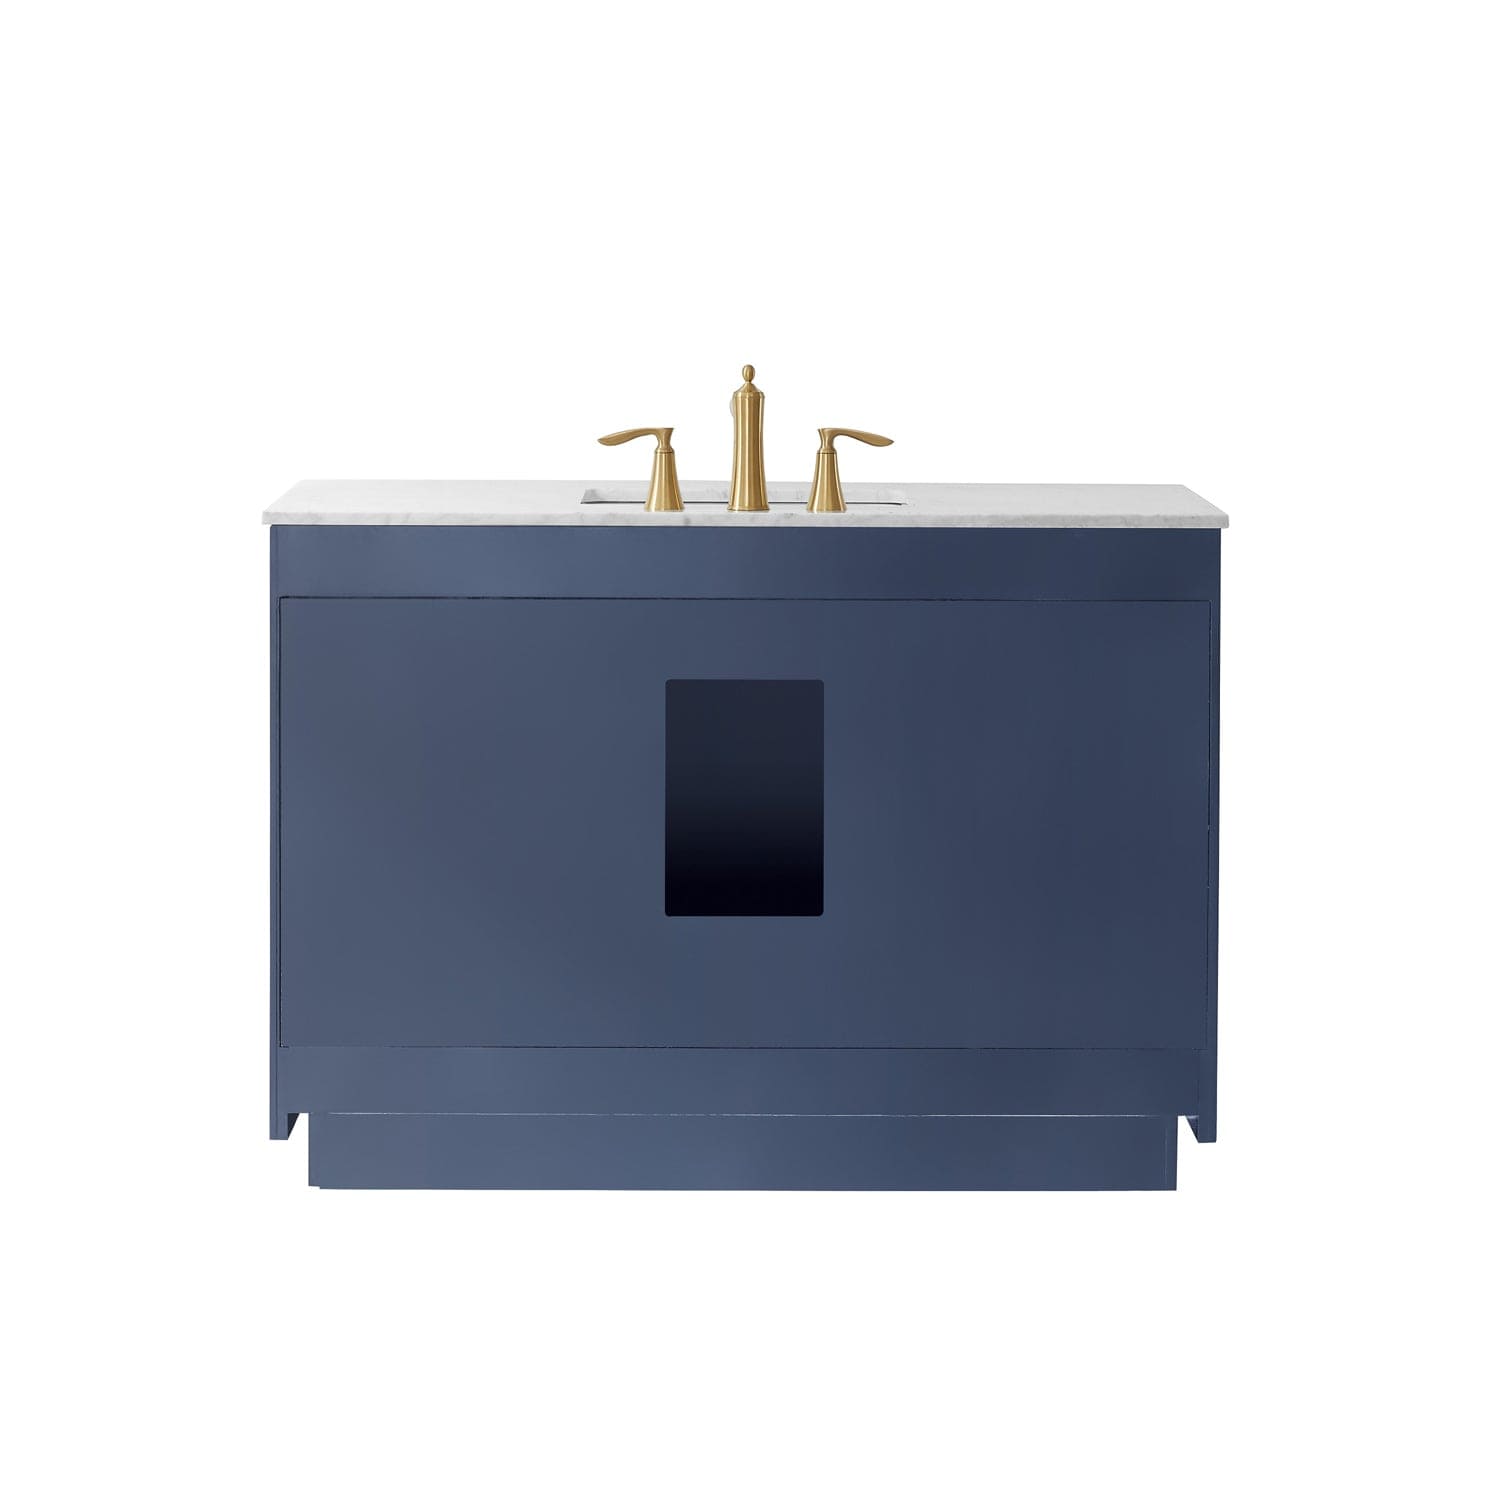 Altair Ivy 48" Single Bathroom Vanity Set in Royal Blue and Carrara White Marble Countertop without Mirror 531048-RB-CA-NM - Molaix631112971188Vanity531048-RB-CA-NM